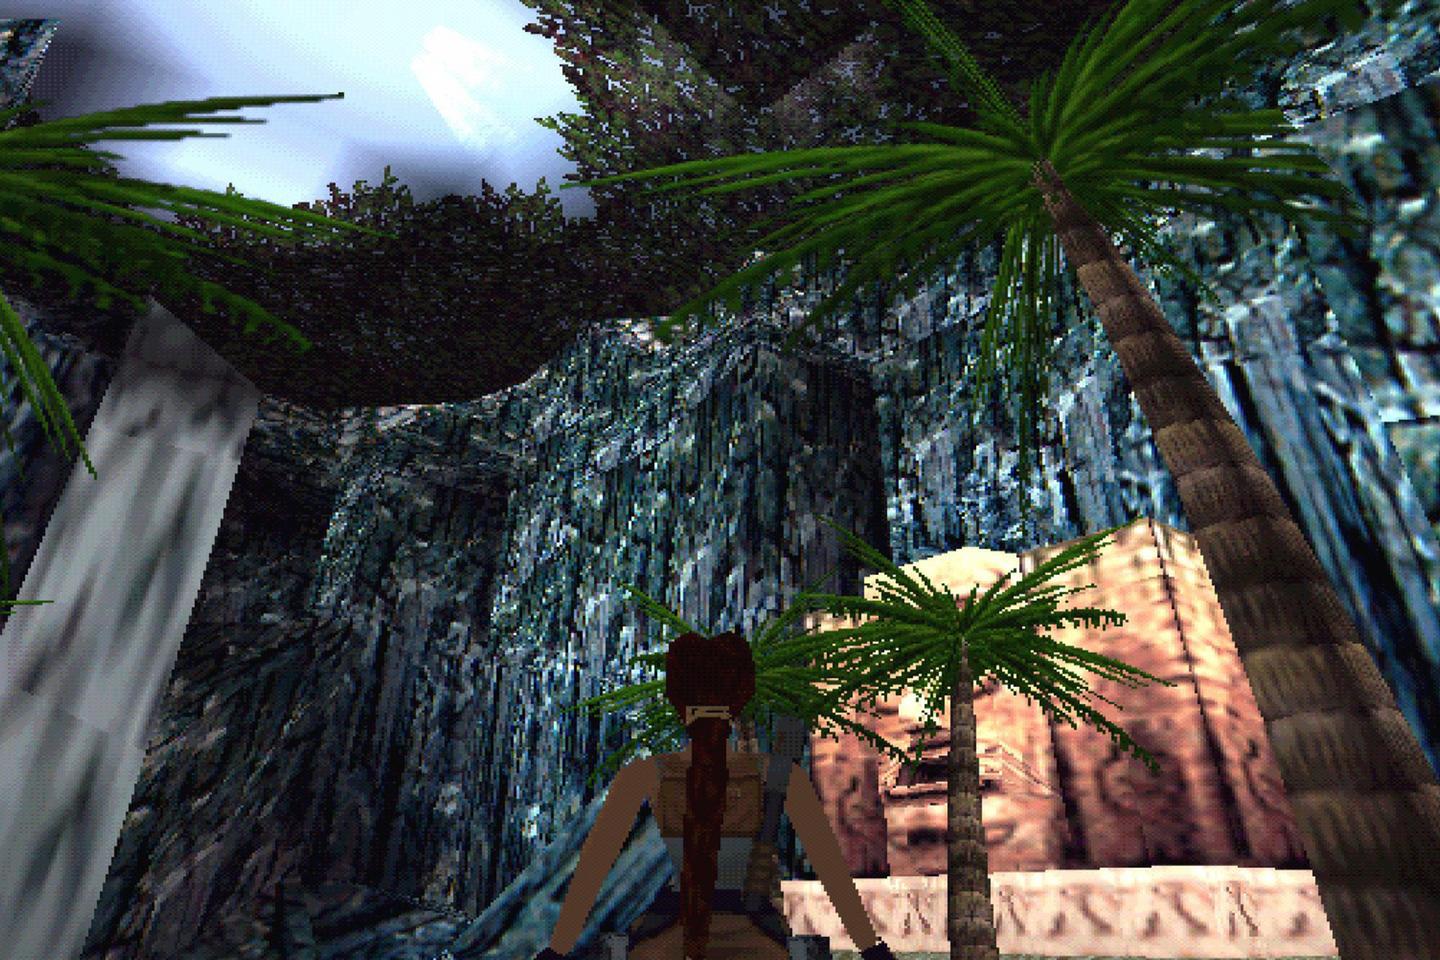 Lara with a ponytail stands near a palm tree, looking at a stone structure amidst towering rock walls under a sliver of sky.